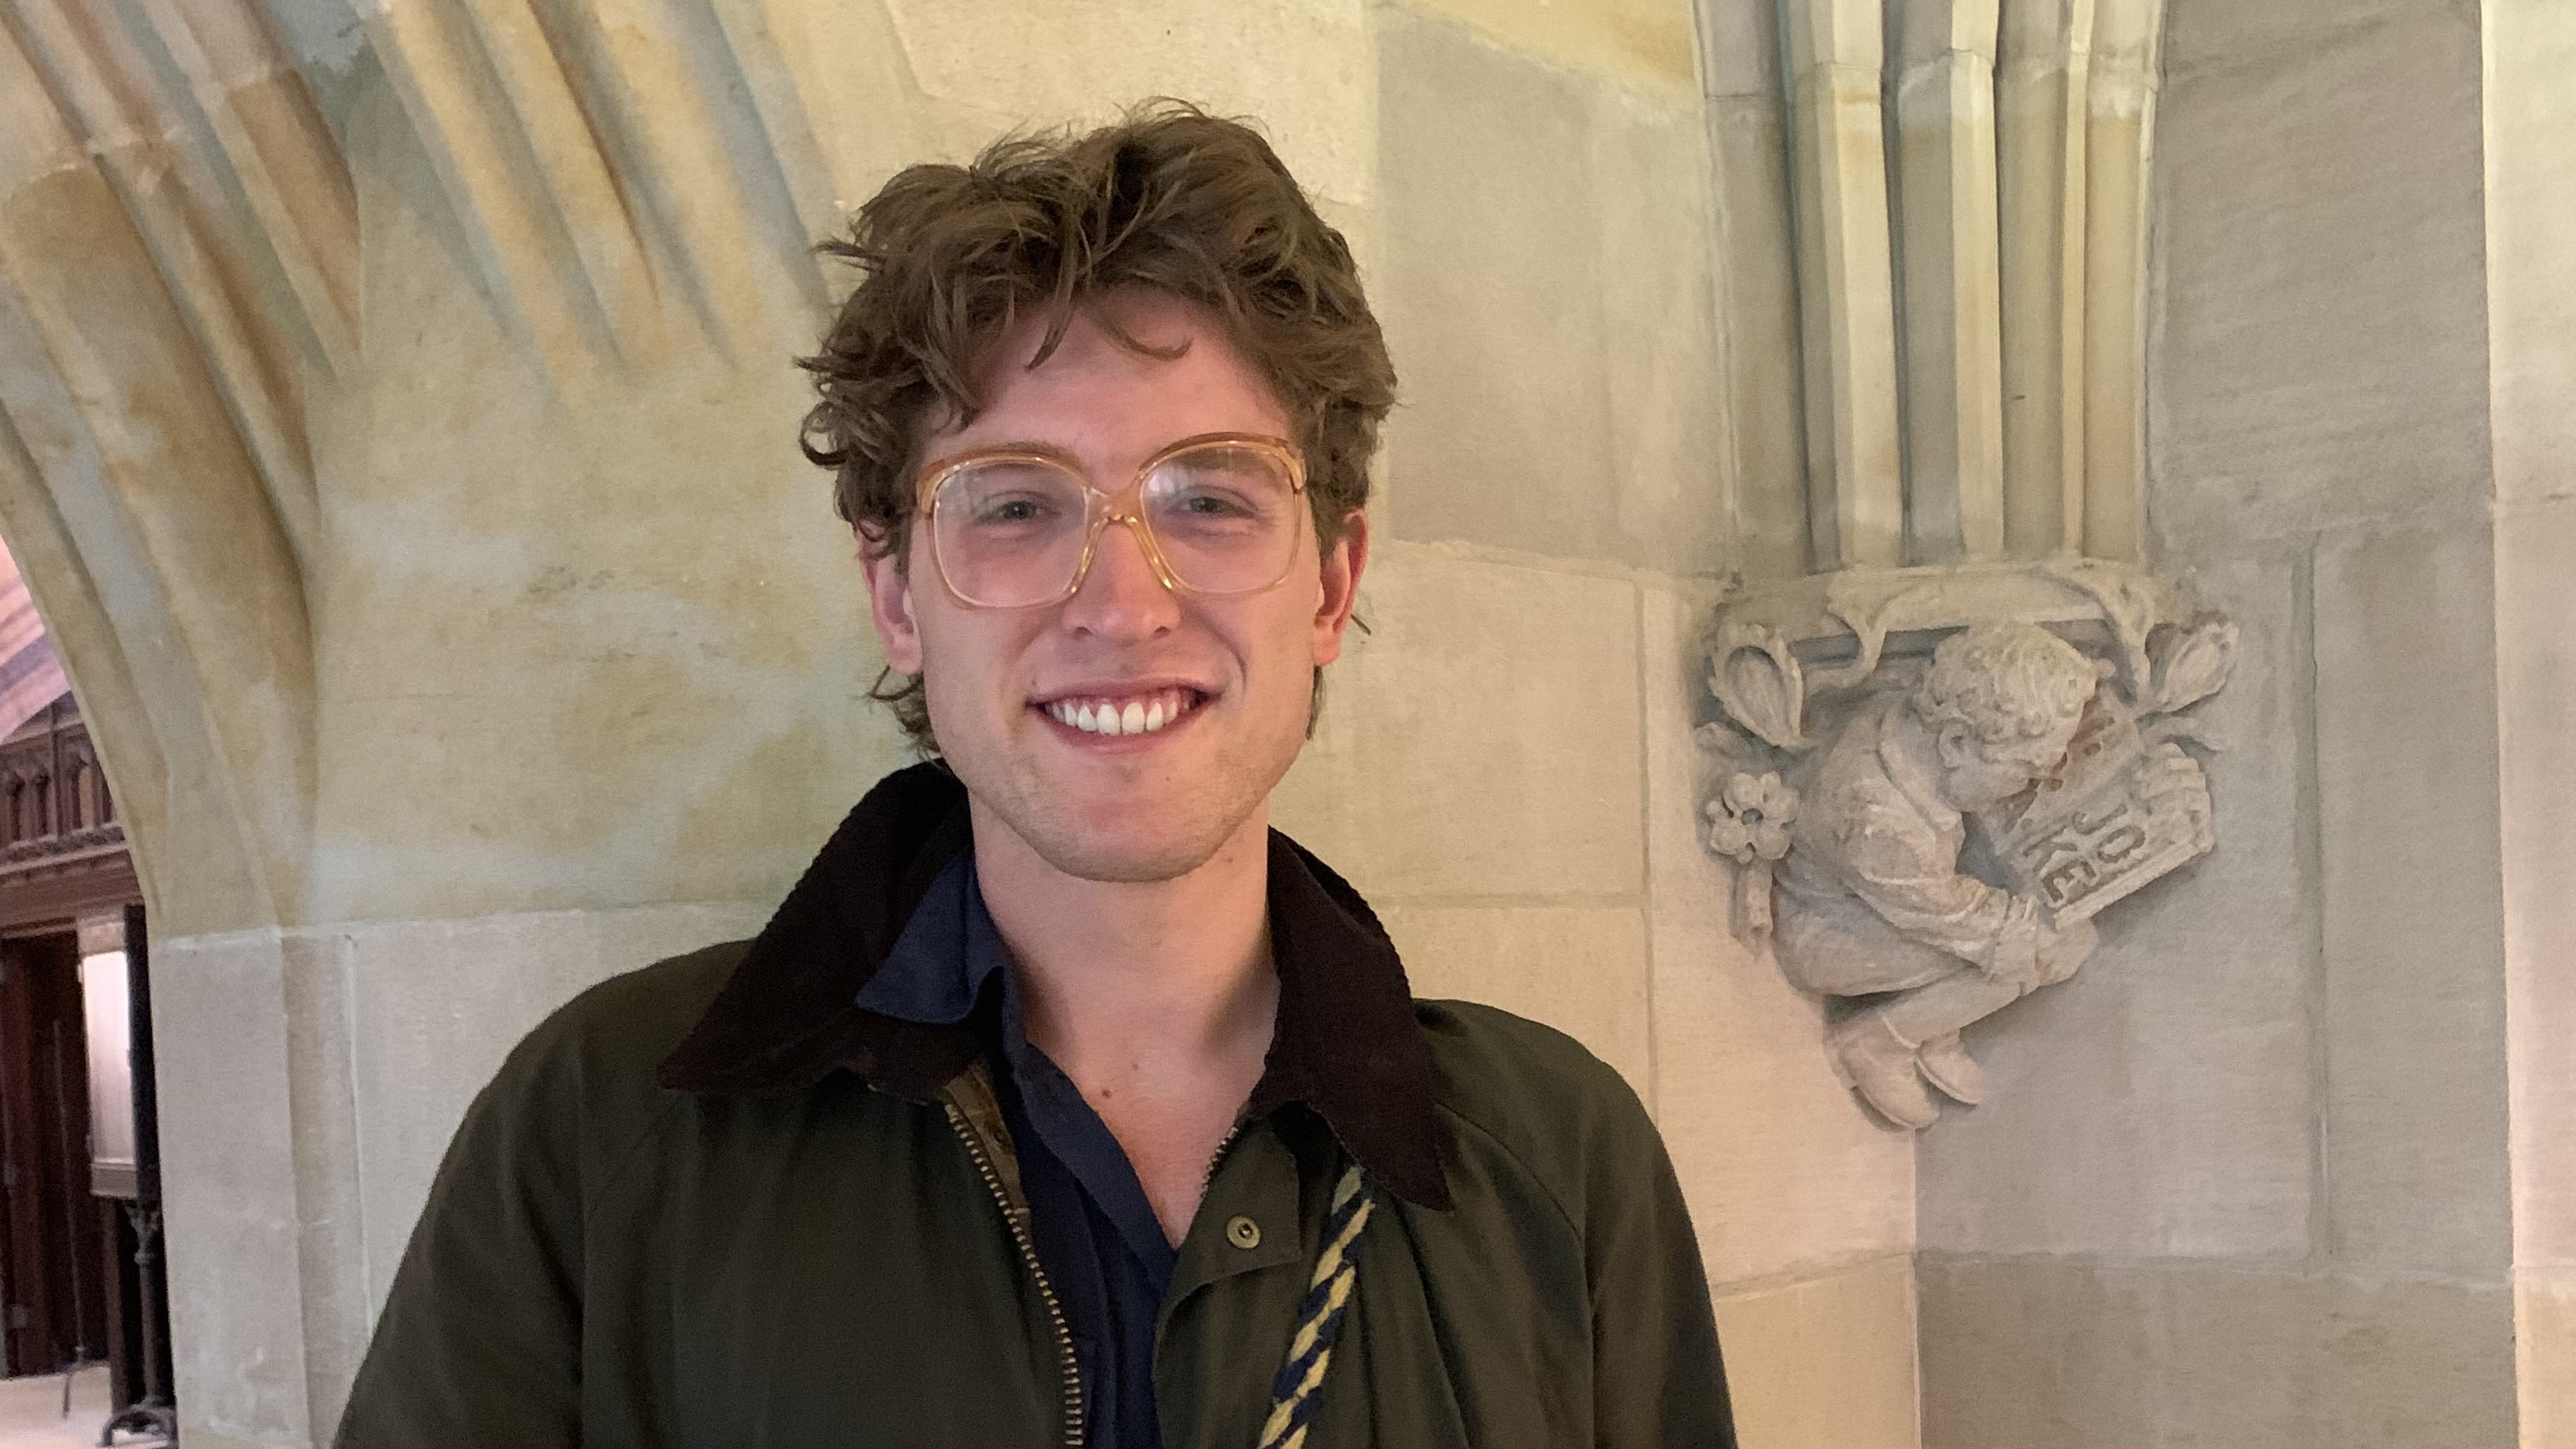 Young man with sandy brown hair and large amber-framed glasses, waring a dark shirt and jacket, smiles broadly and poses in front of carved column in the exhibition corridor of Sterling Memorial. The small carved figure is of a crouched man reading a book, one page of which has the carved word "Joke." 